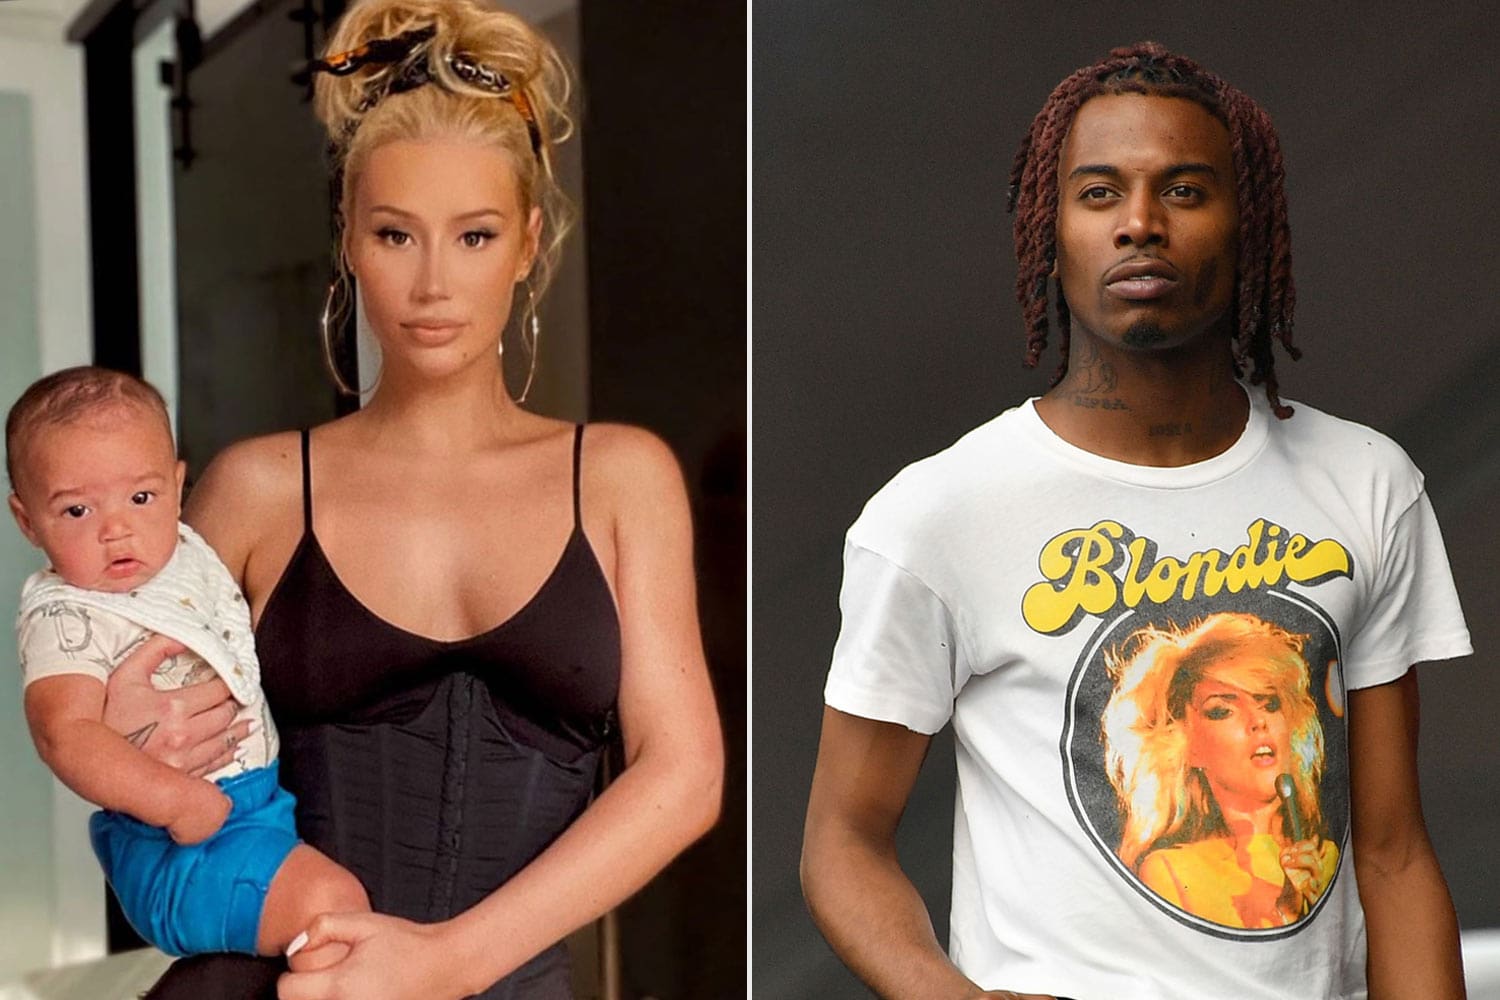 iggy-azalea-is-reportedly-really-happy-months-after-breaking-up-with-baby-daddy-playboi-carti-heres-why